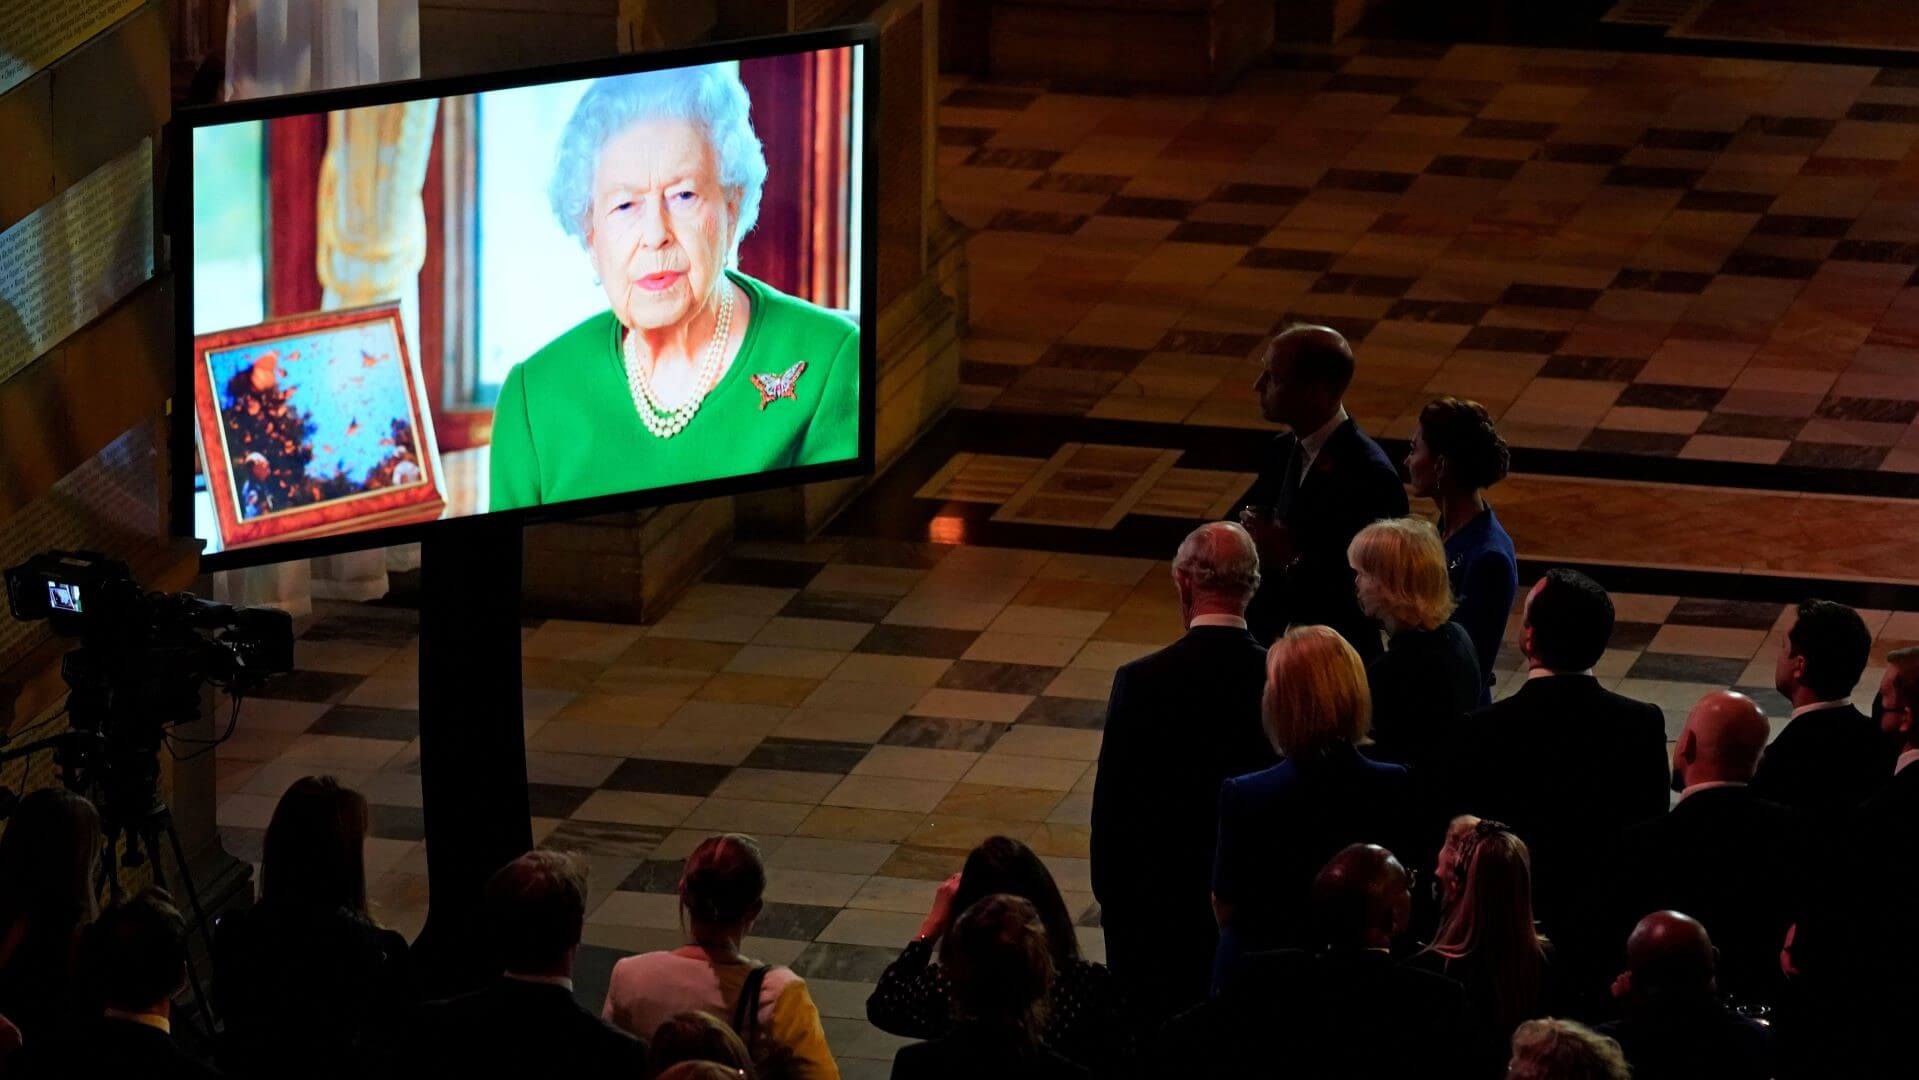 Queen addressing world leaders gathered at the COP26 climate summit in Glasgow via video link